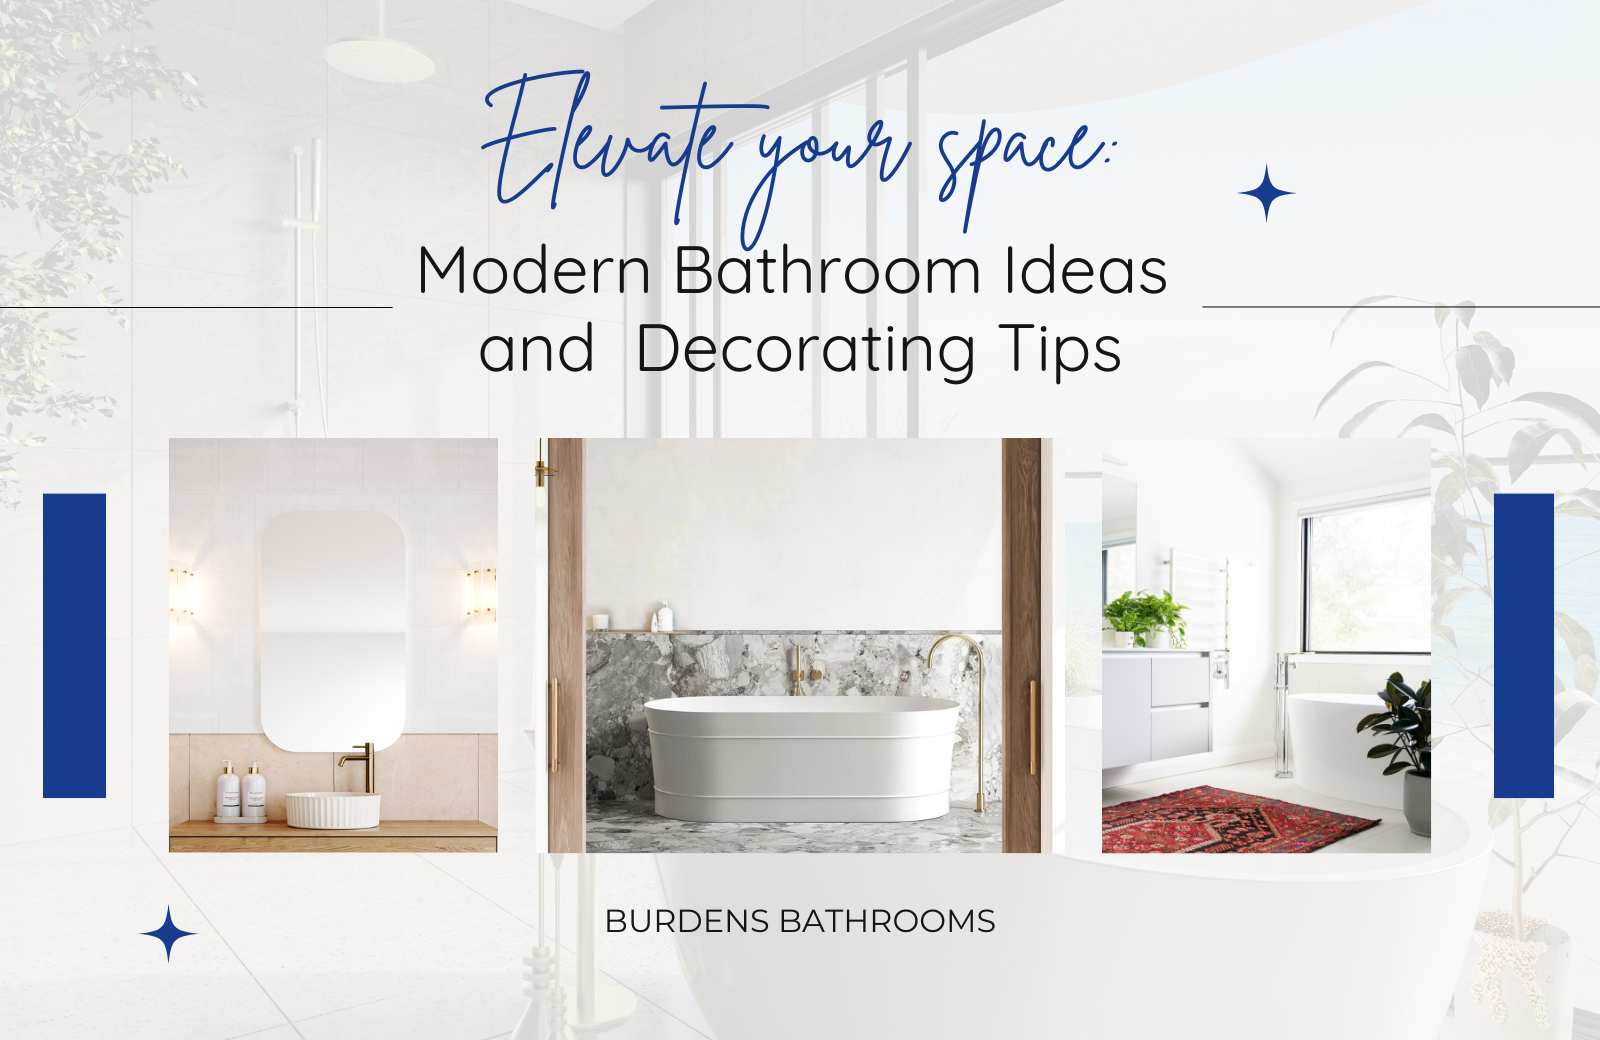 Elevate Your Space: Modern Bathroom Ideas and Decorating Tips